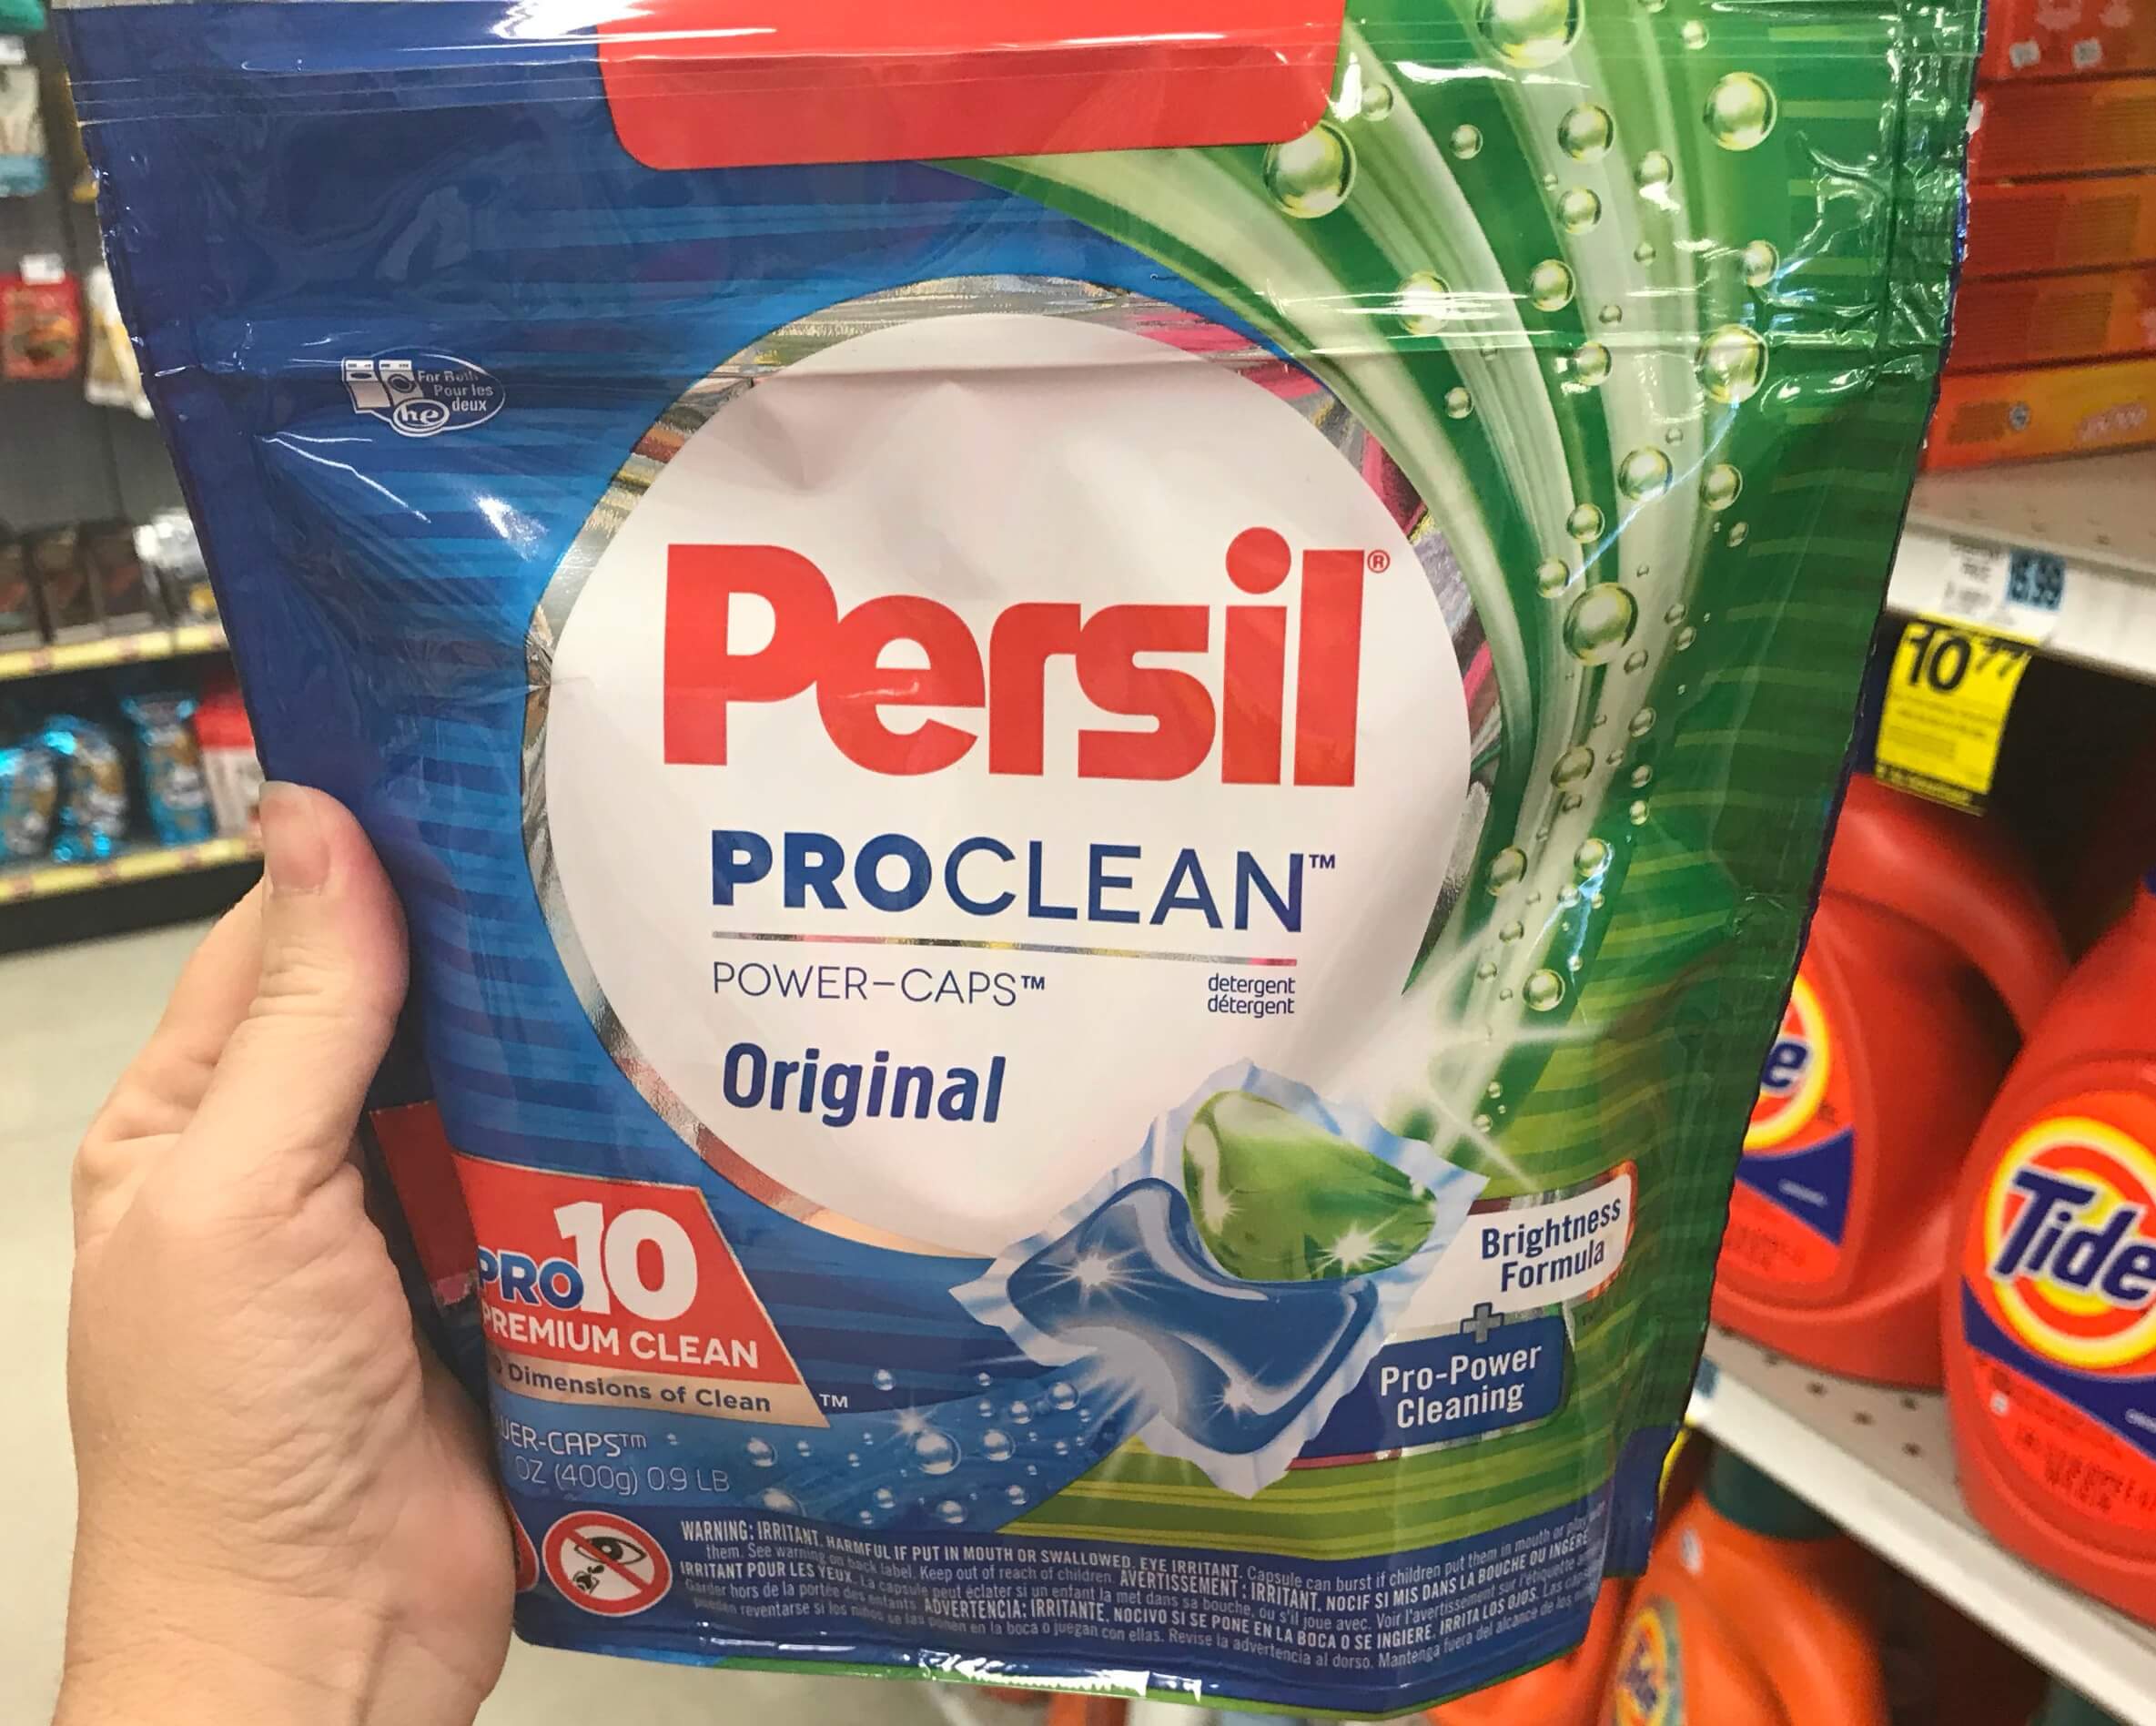 rite-aid-shoppers-persil-laundry-detergent-just-1-99-ibotta-rebate